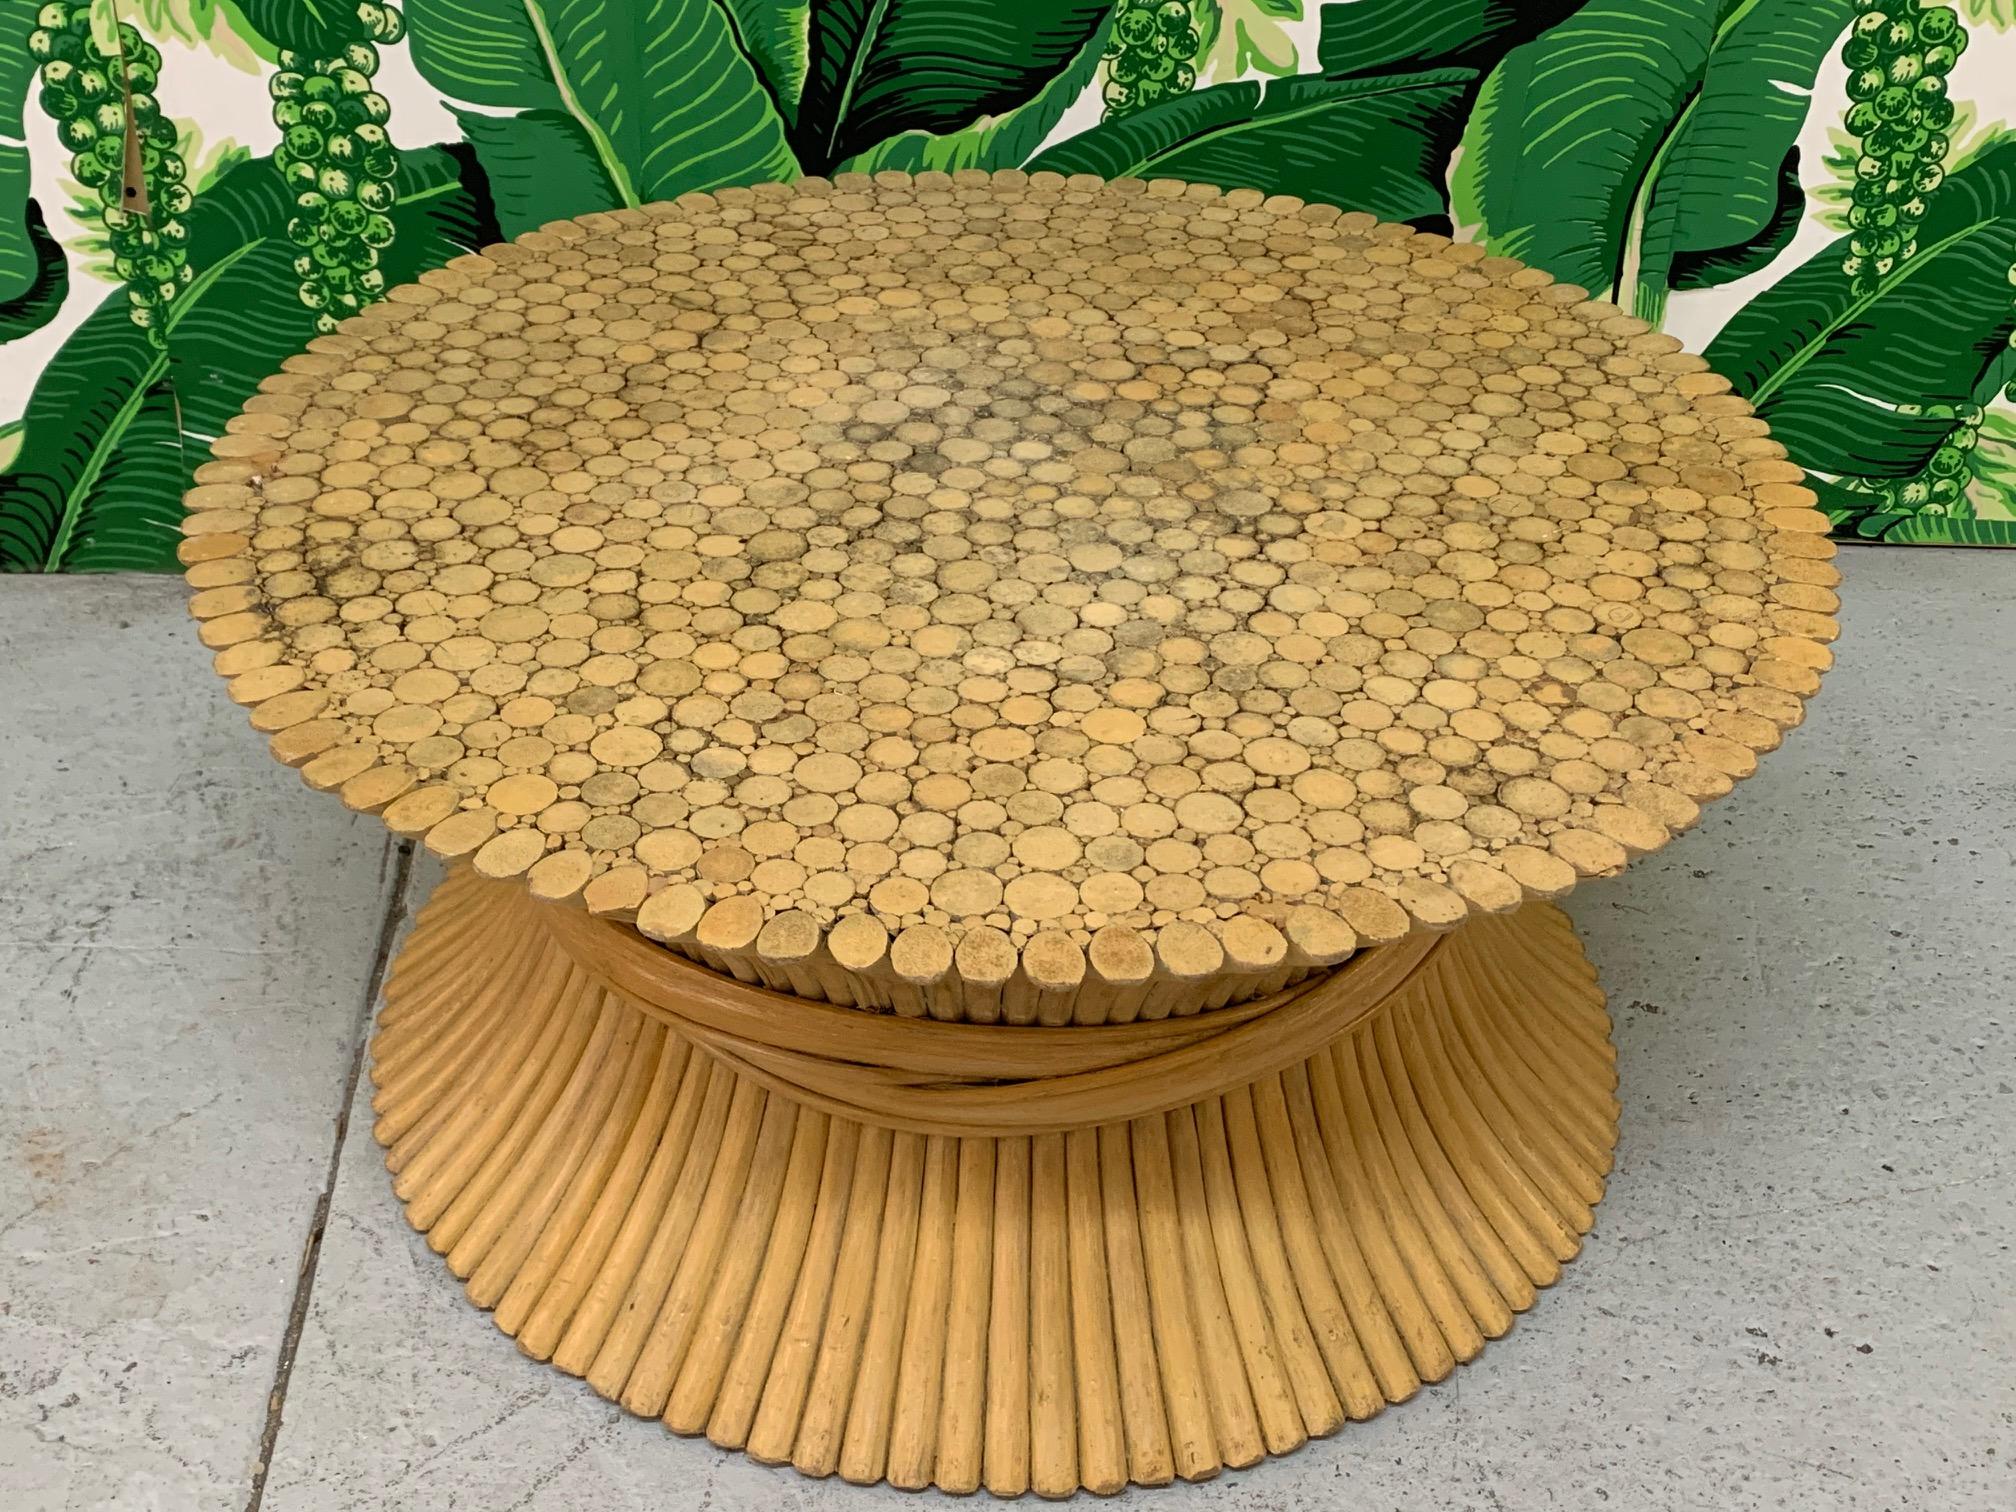 Vintage McGuire sheaf of wheat coffee or cocktail table features iconic bound rattan design. Good vintage condition with minor imperfections consistent with age. Unmarked.